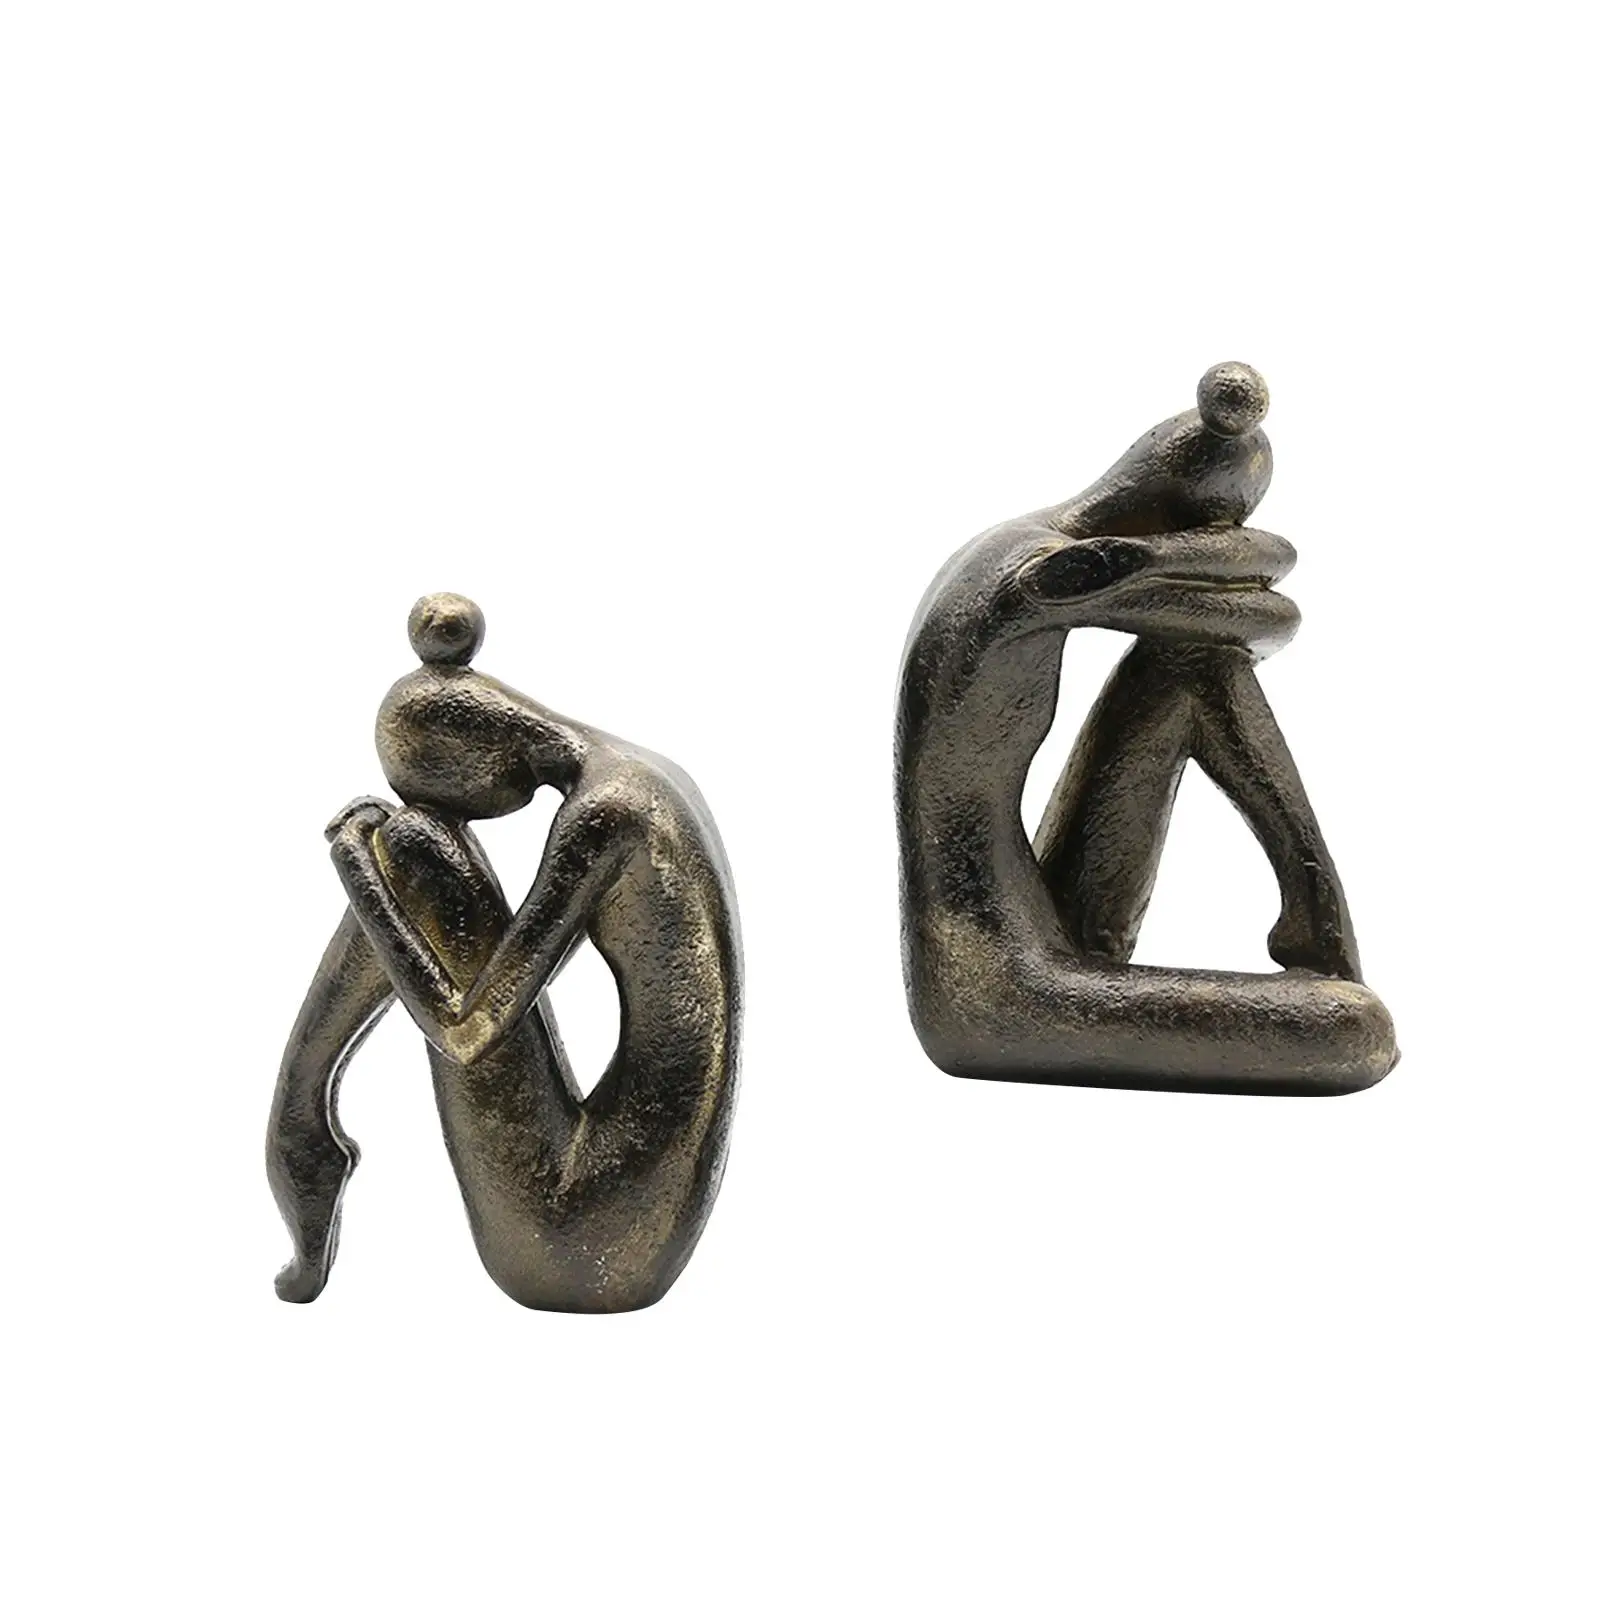 Thinker Bookends Book Holder Ornament Table Modern Decorative Bookends for Heavy Books Decorative Bookends Bookends for Shelves